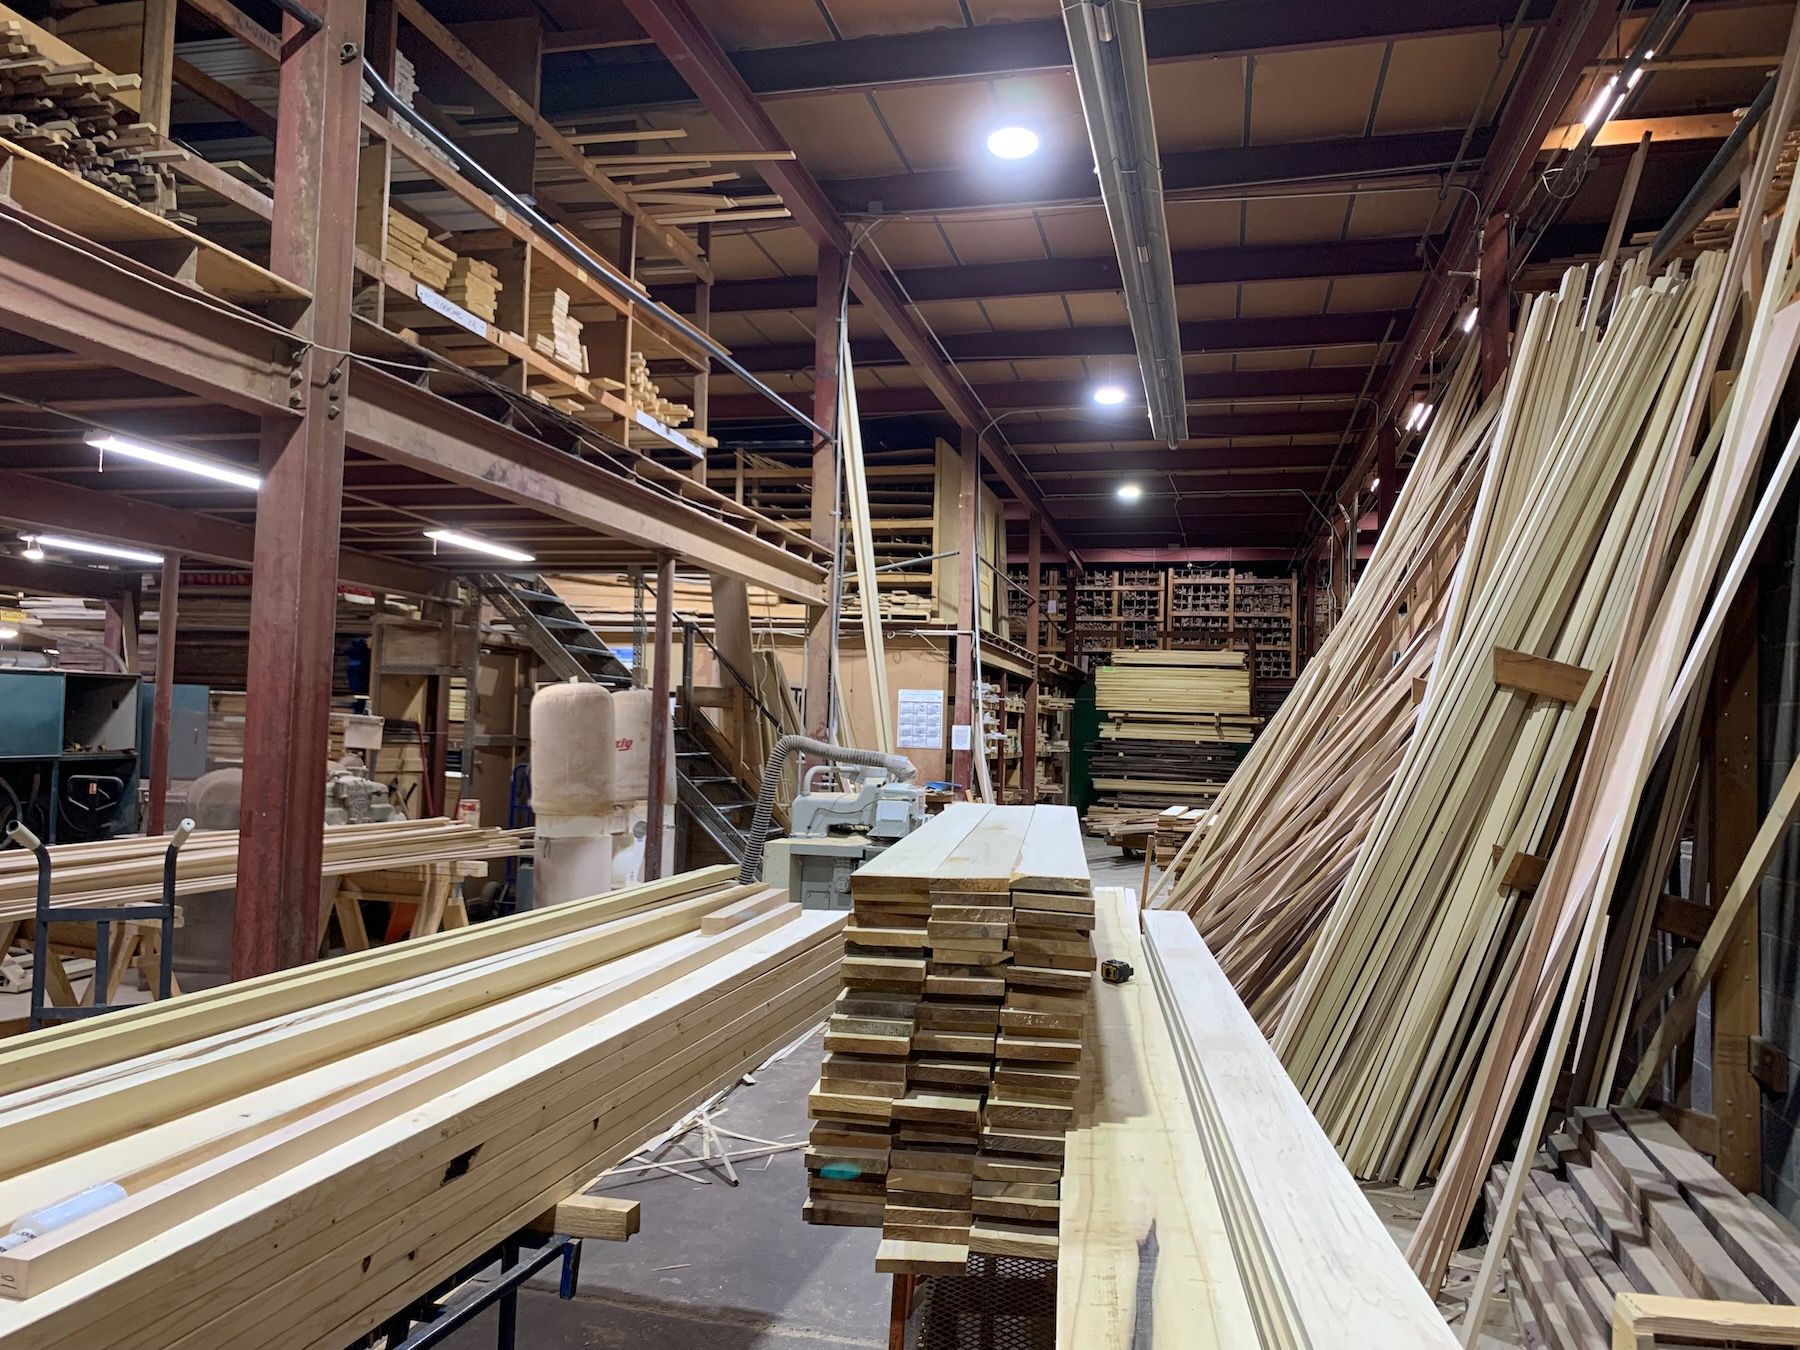 Stacks and piles of boards in warehouse space.